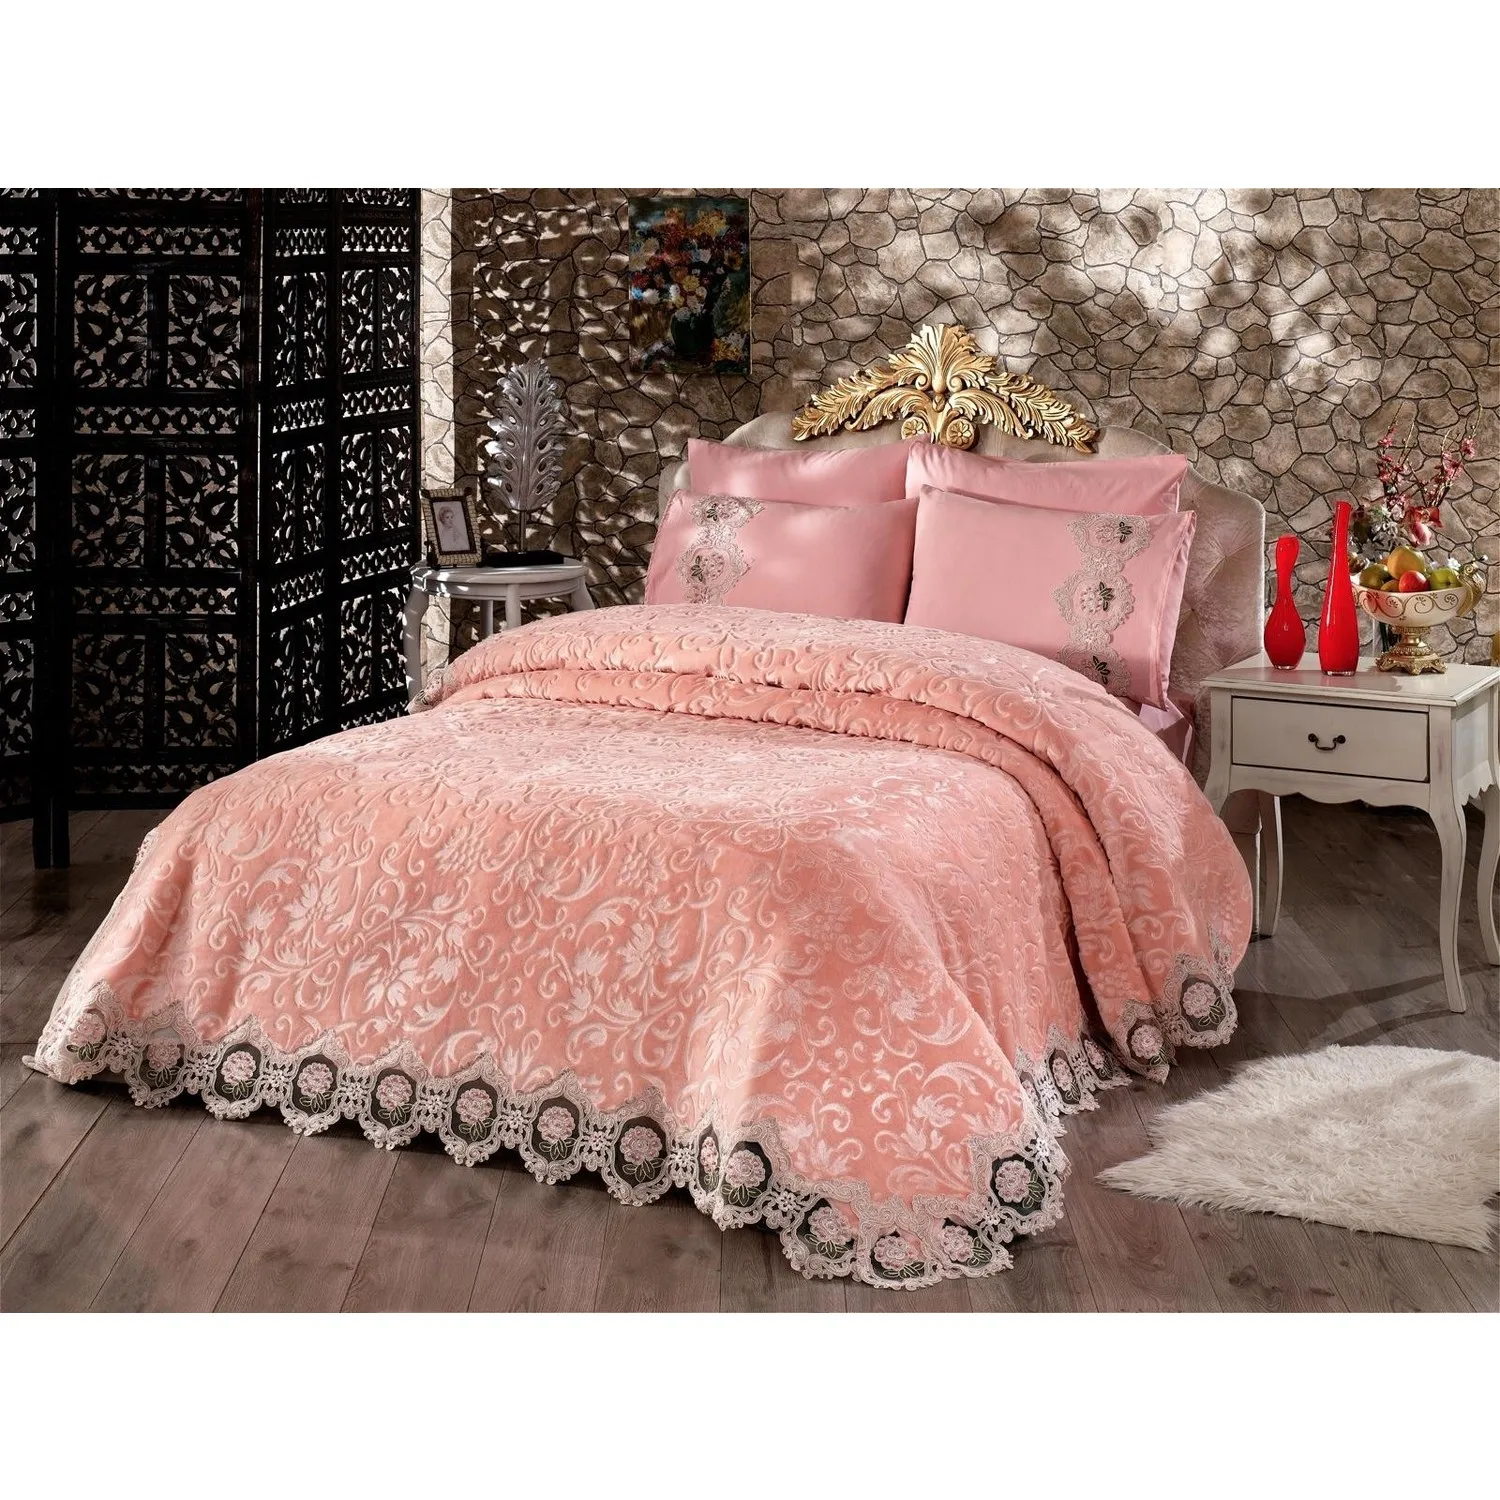 

6 Pieces Chenille French Lace Double Pique Set Dowry Bedspread Set Bedspread Set Suitable for dowry, gift, daily use Fast